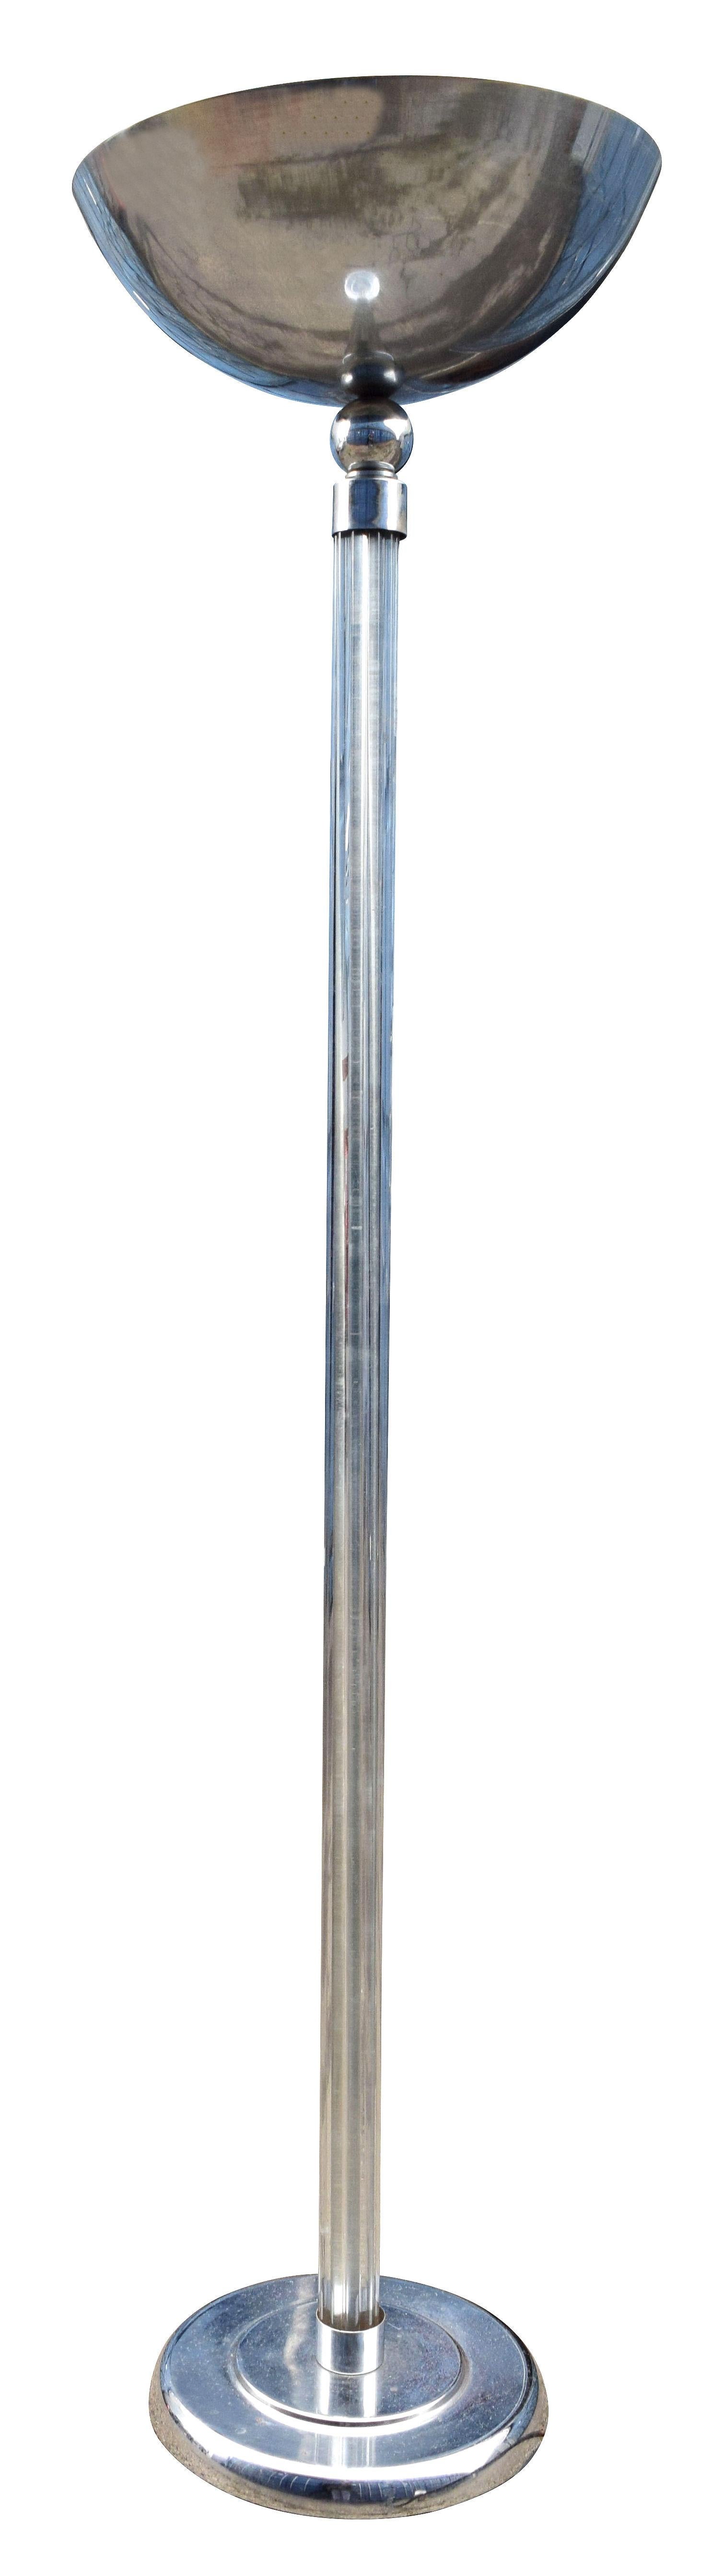 Art Deco Chrome and Glass Uplighter Floor Lamp, 1930s  In Good Condition For Sale In Devon, England